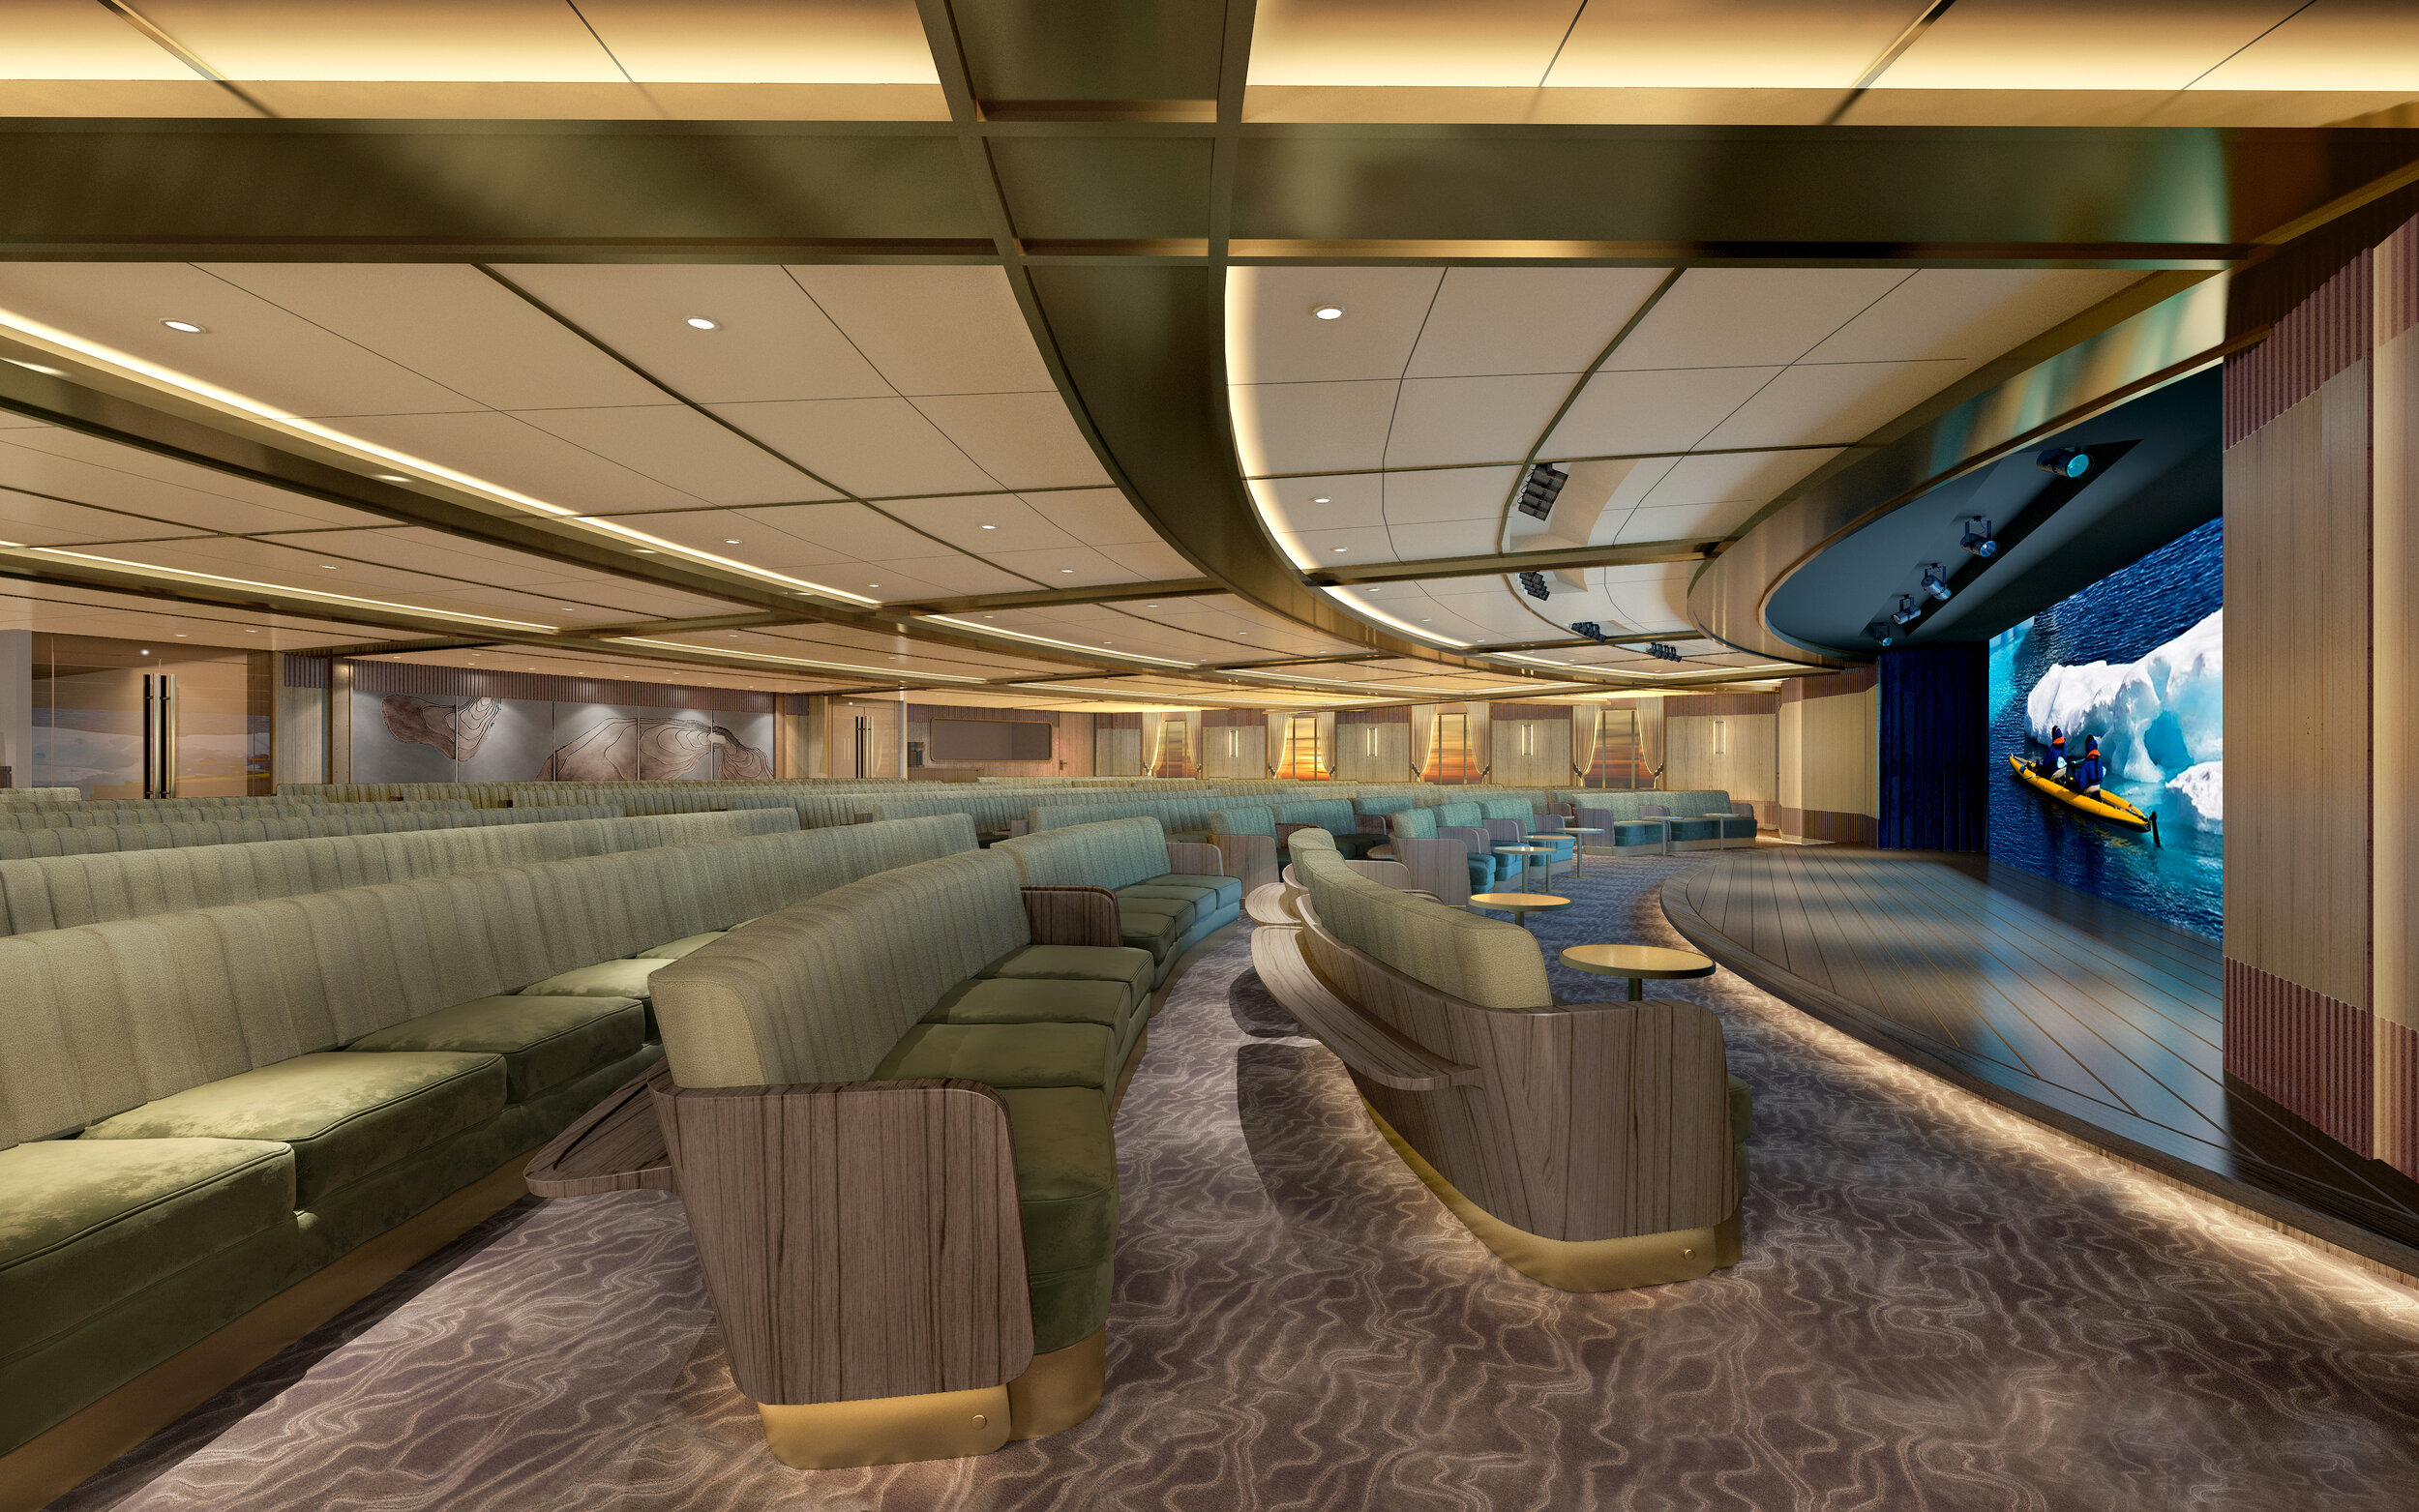 Seabourn expedition ships - Discovery Center rendering_07 16 19.jpg